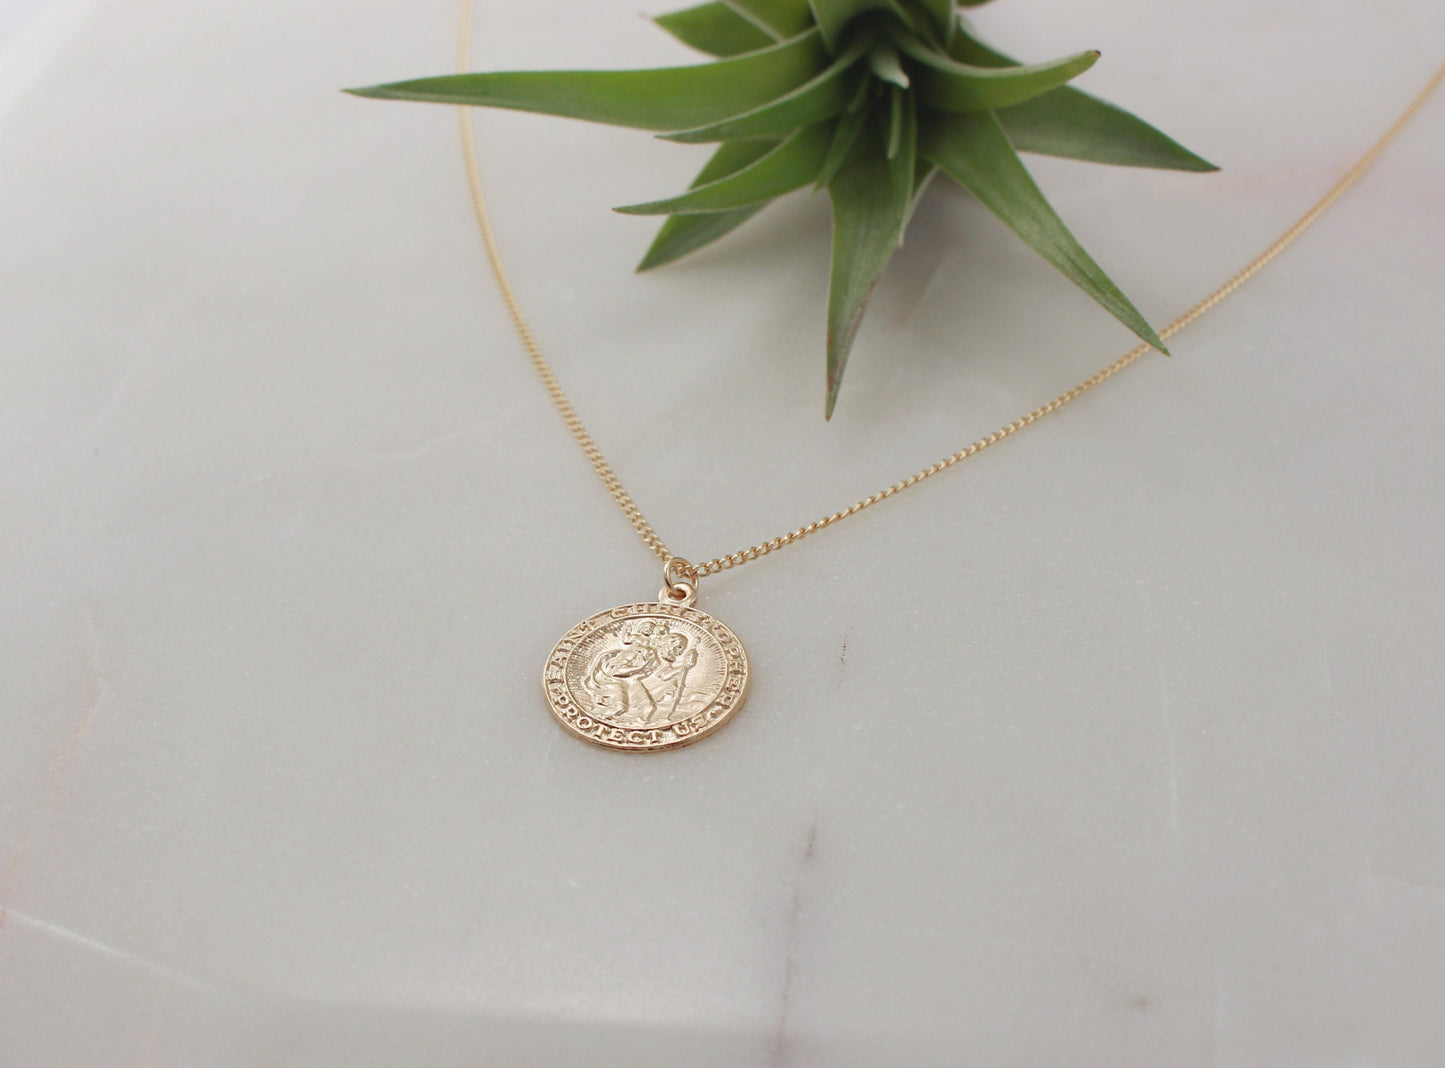 Gold Filled Medallion Necklace(heavy chain), St Christopher Charm, Round - 14k Gold Filled Charm and Chain, Coin Size 17.5mm